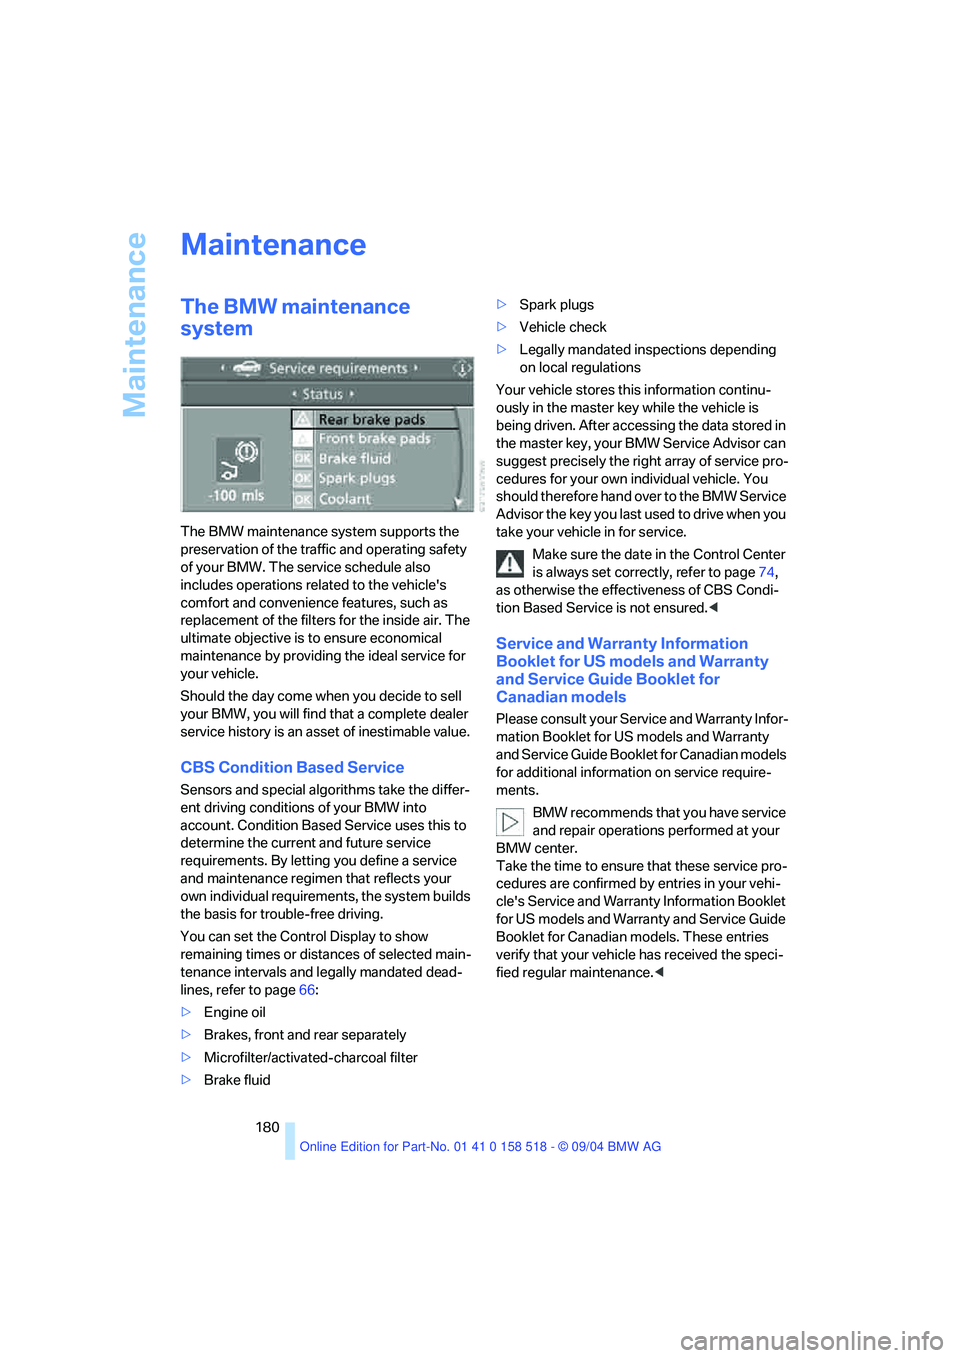 BMW 525I 2005  Owners Manual Maintenance
180
Maintenance
The BMW maintenance 
system
The BMW maintenance system supports the 
preservation of the traffic and operating safety 
of your BMW. The service schedule also 
includes oper